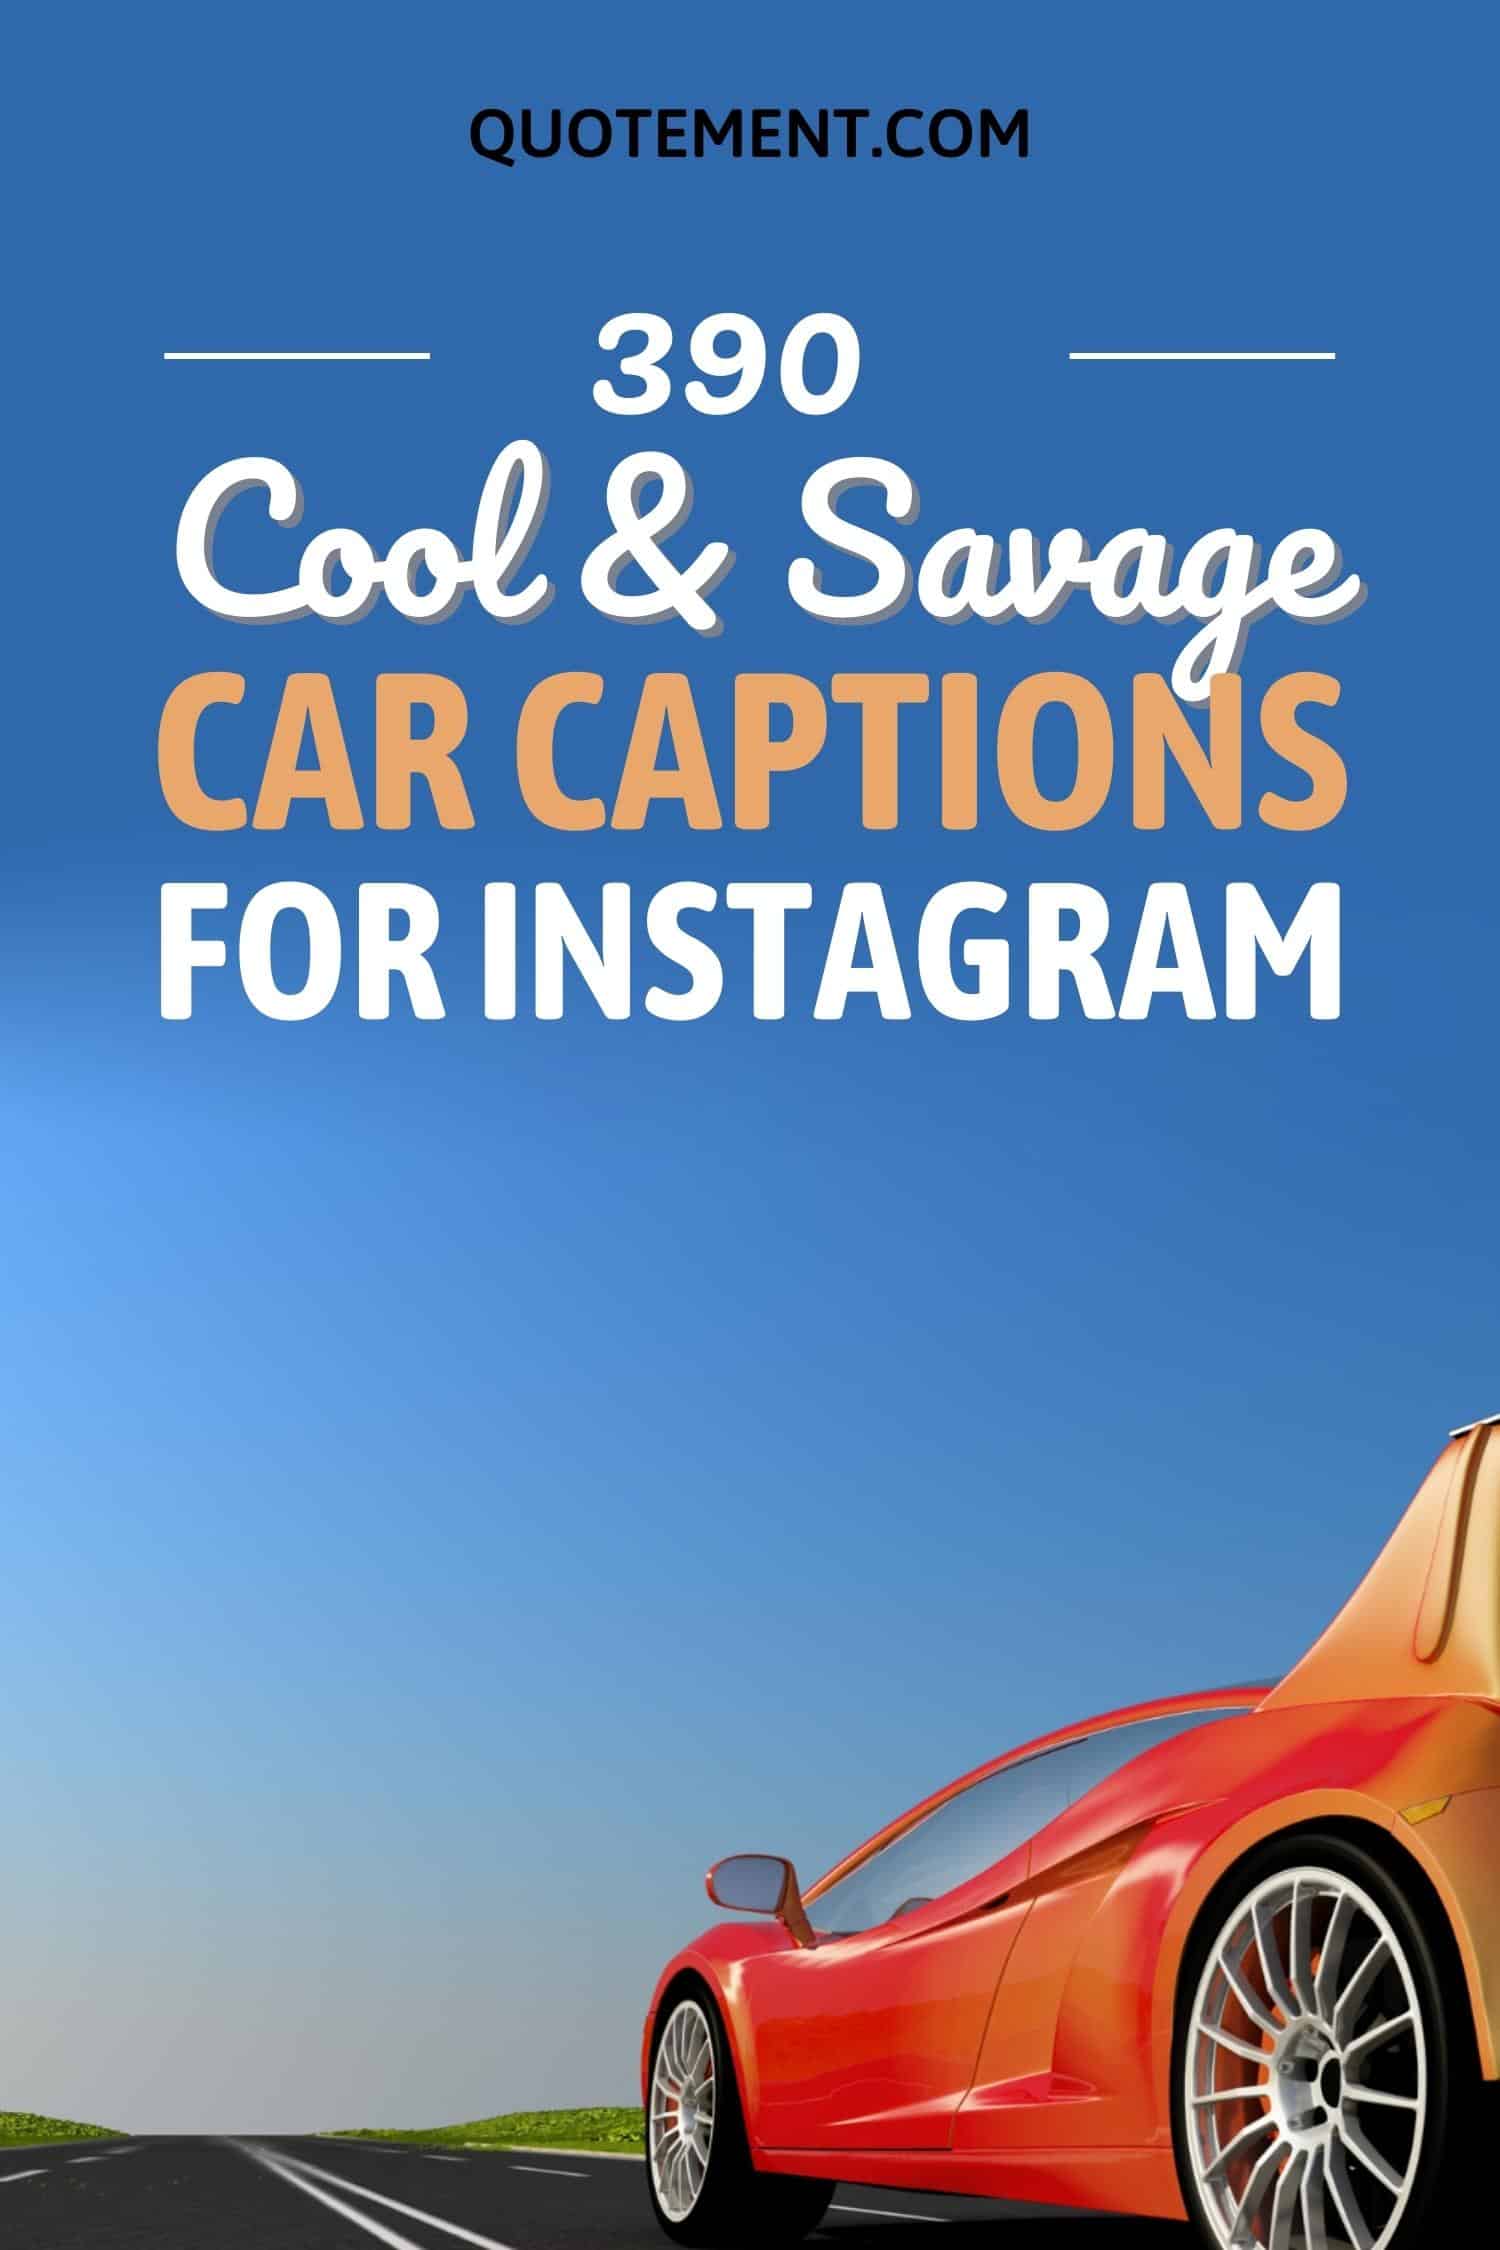 390 Cool Car Captions For Instagram For All The Car Lovers